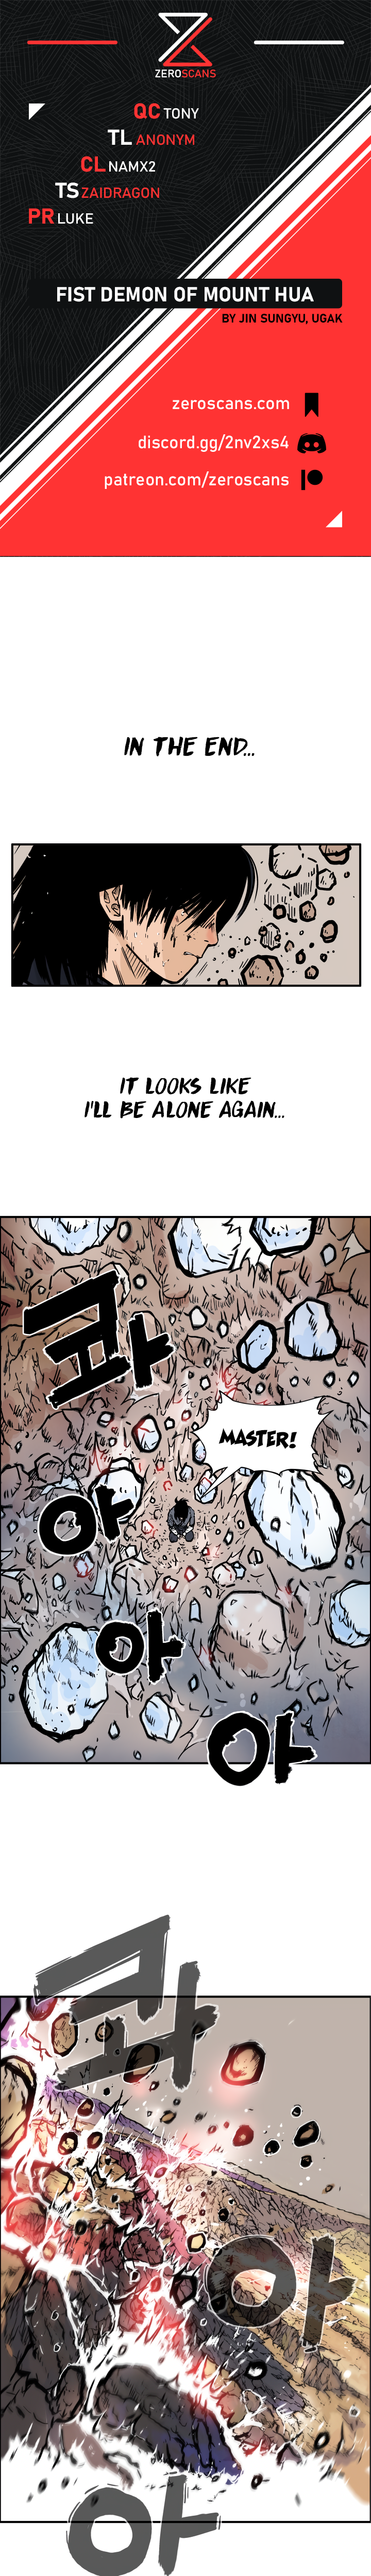 Fist Demon of Mount Hua - Chapter 3937 - Image 1